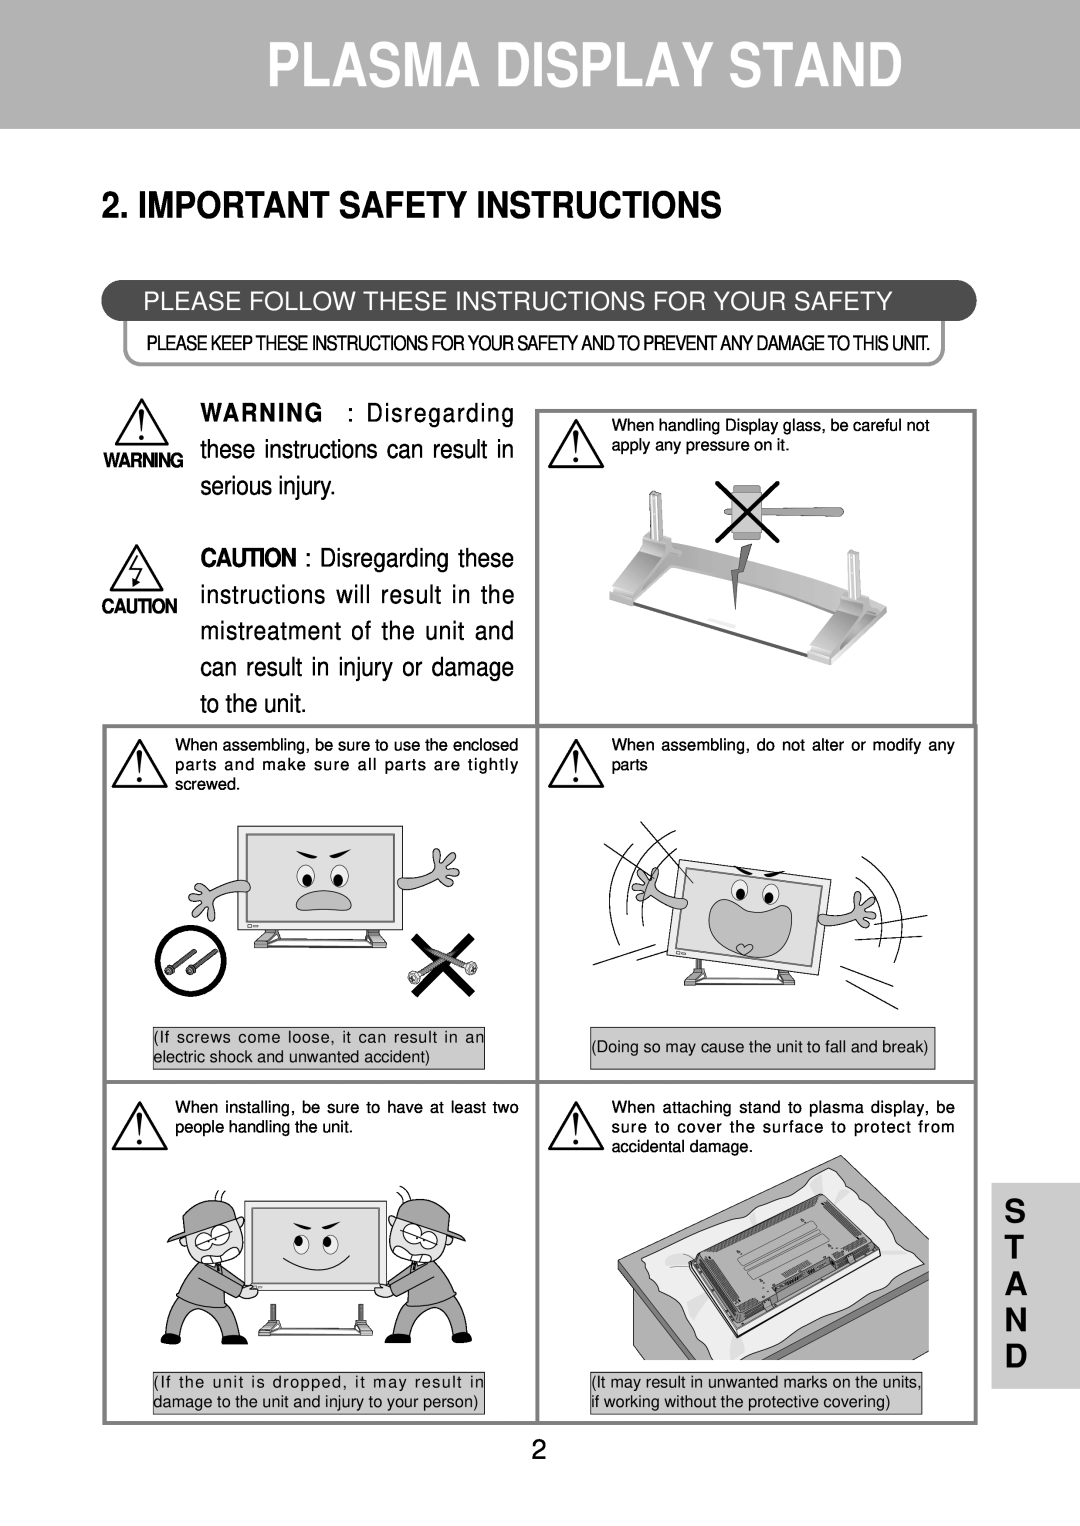 Daewoo DP-ST21, DP-ST20 instruction manual Plasma Display Stand, Important Safety Instructions, S T A N D 